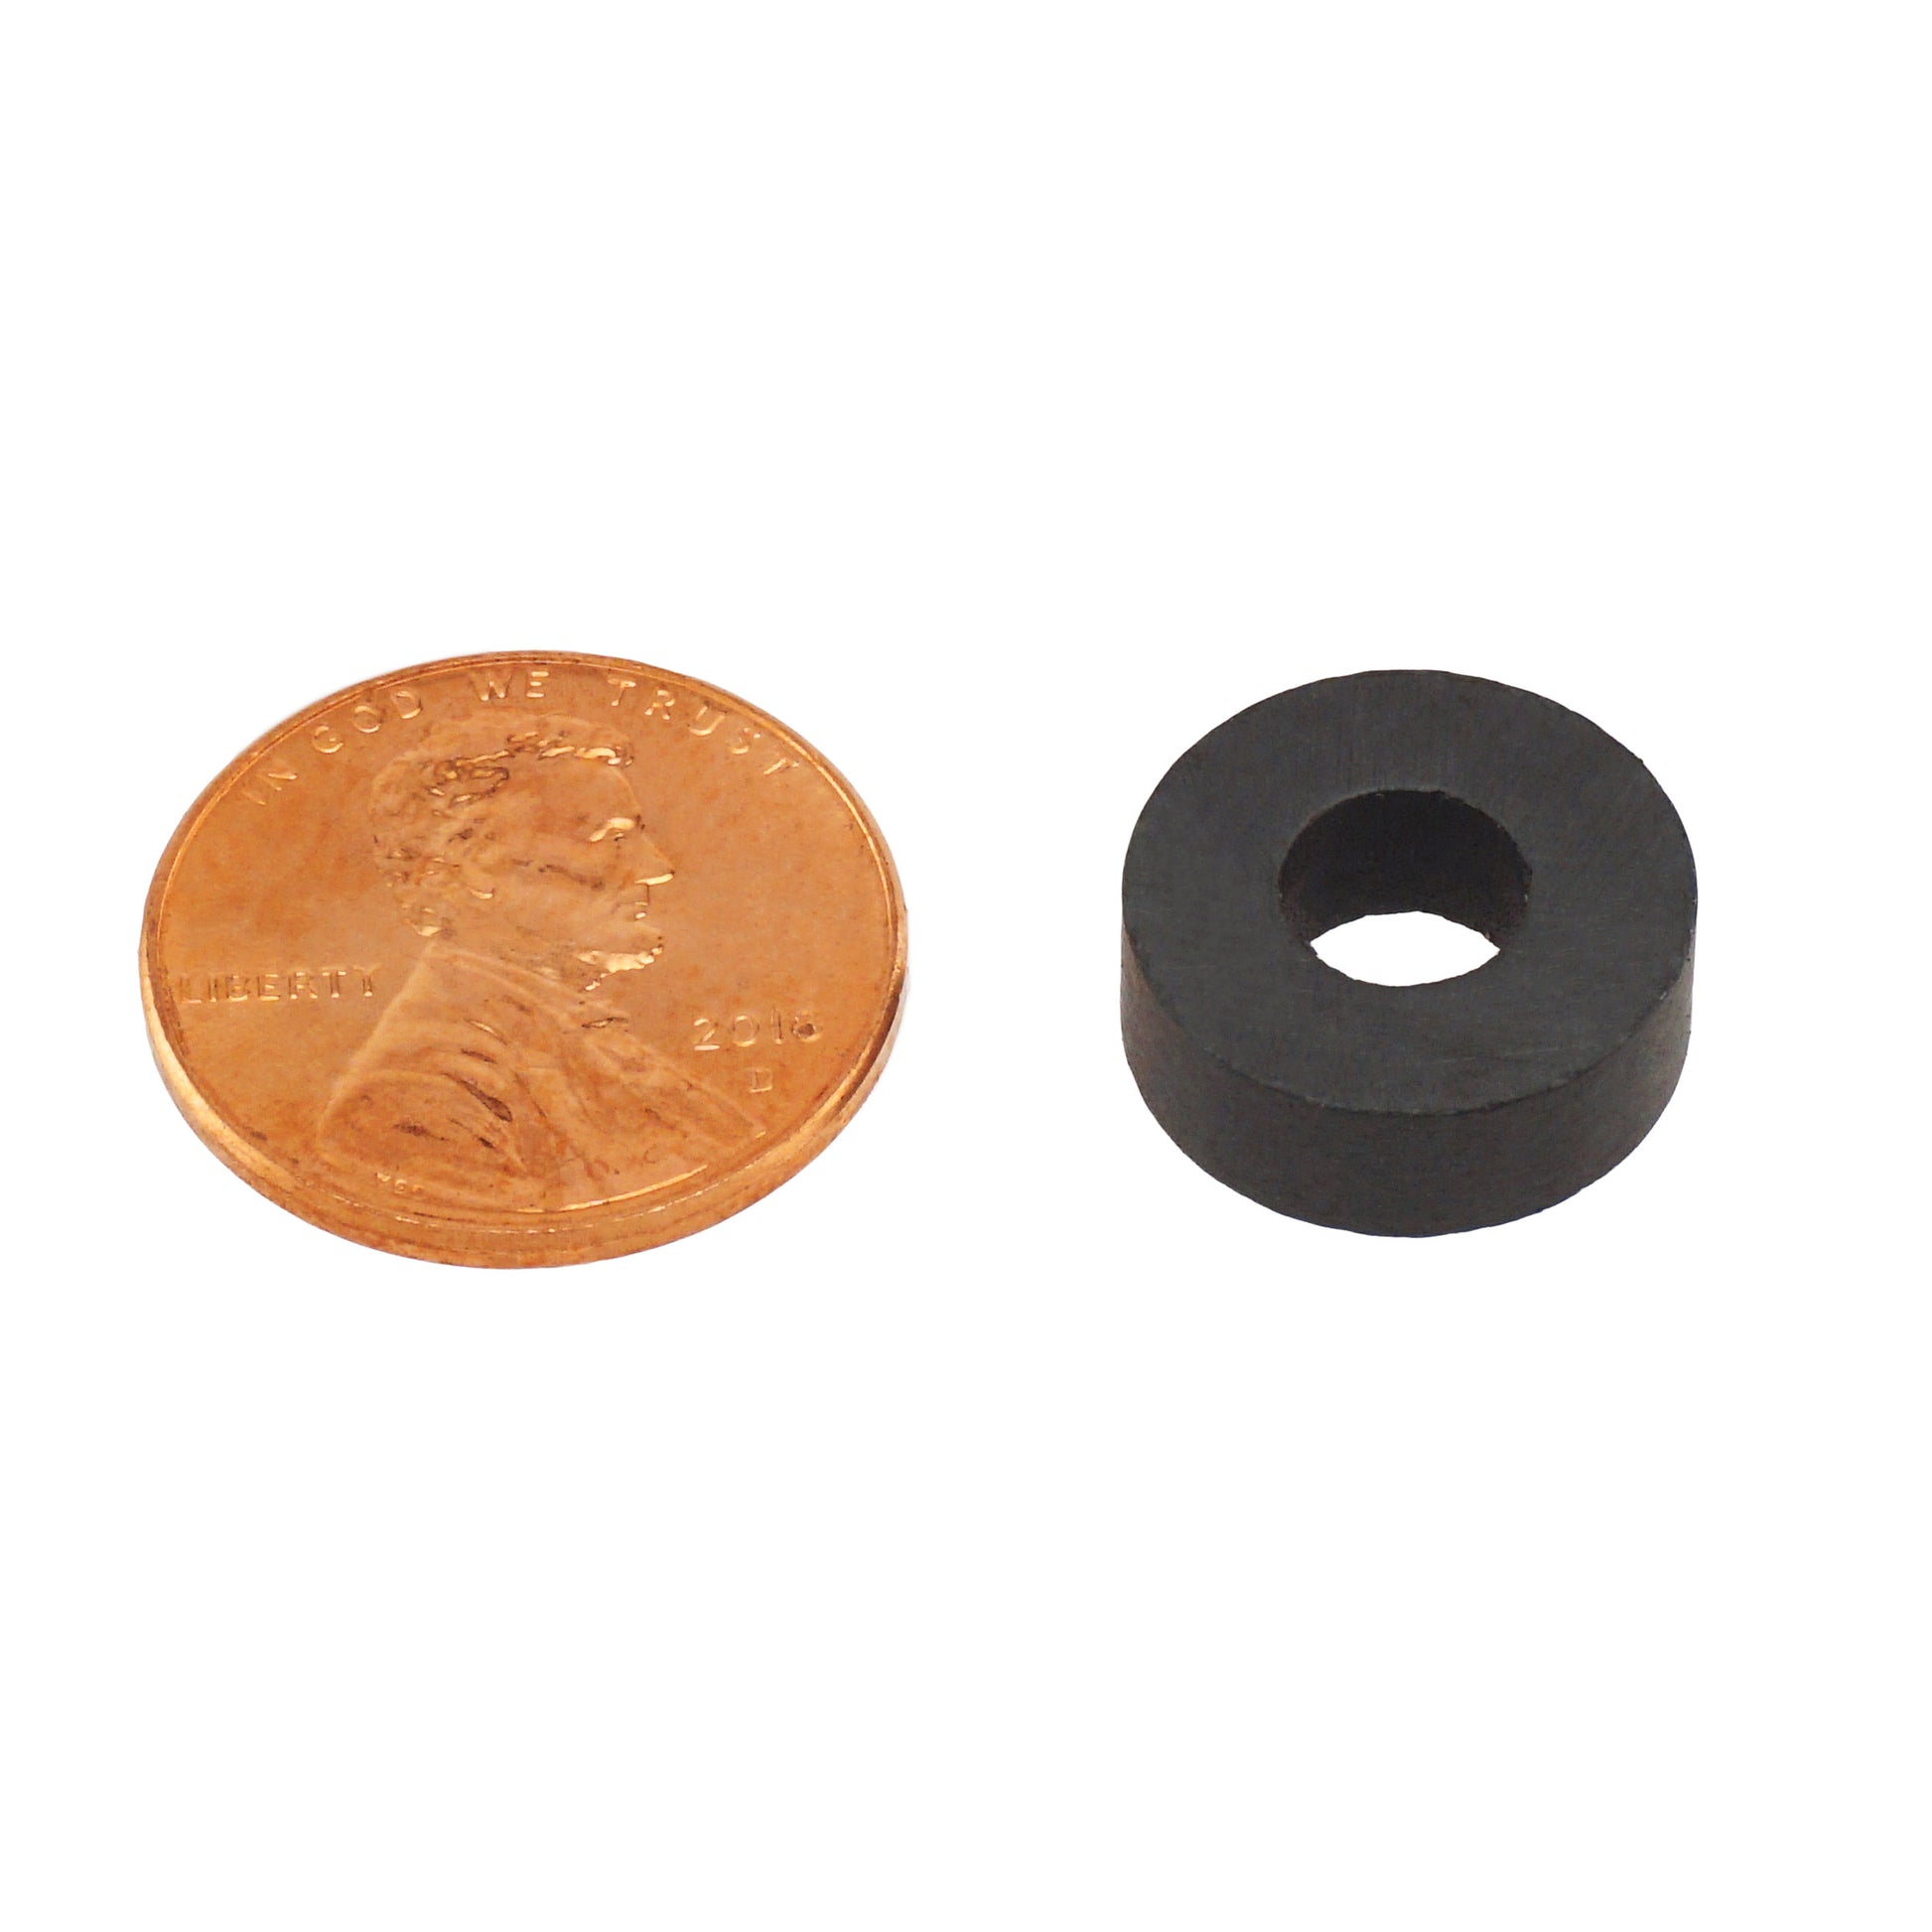 Load image into Gallery viewer, CR552282C Ceramic Ring Magnet - Compared to Penny for Size Reference